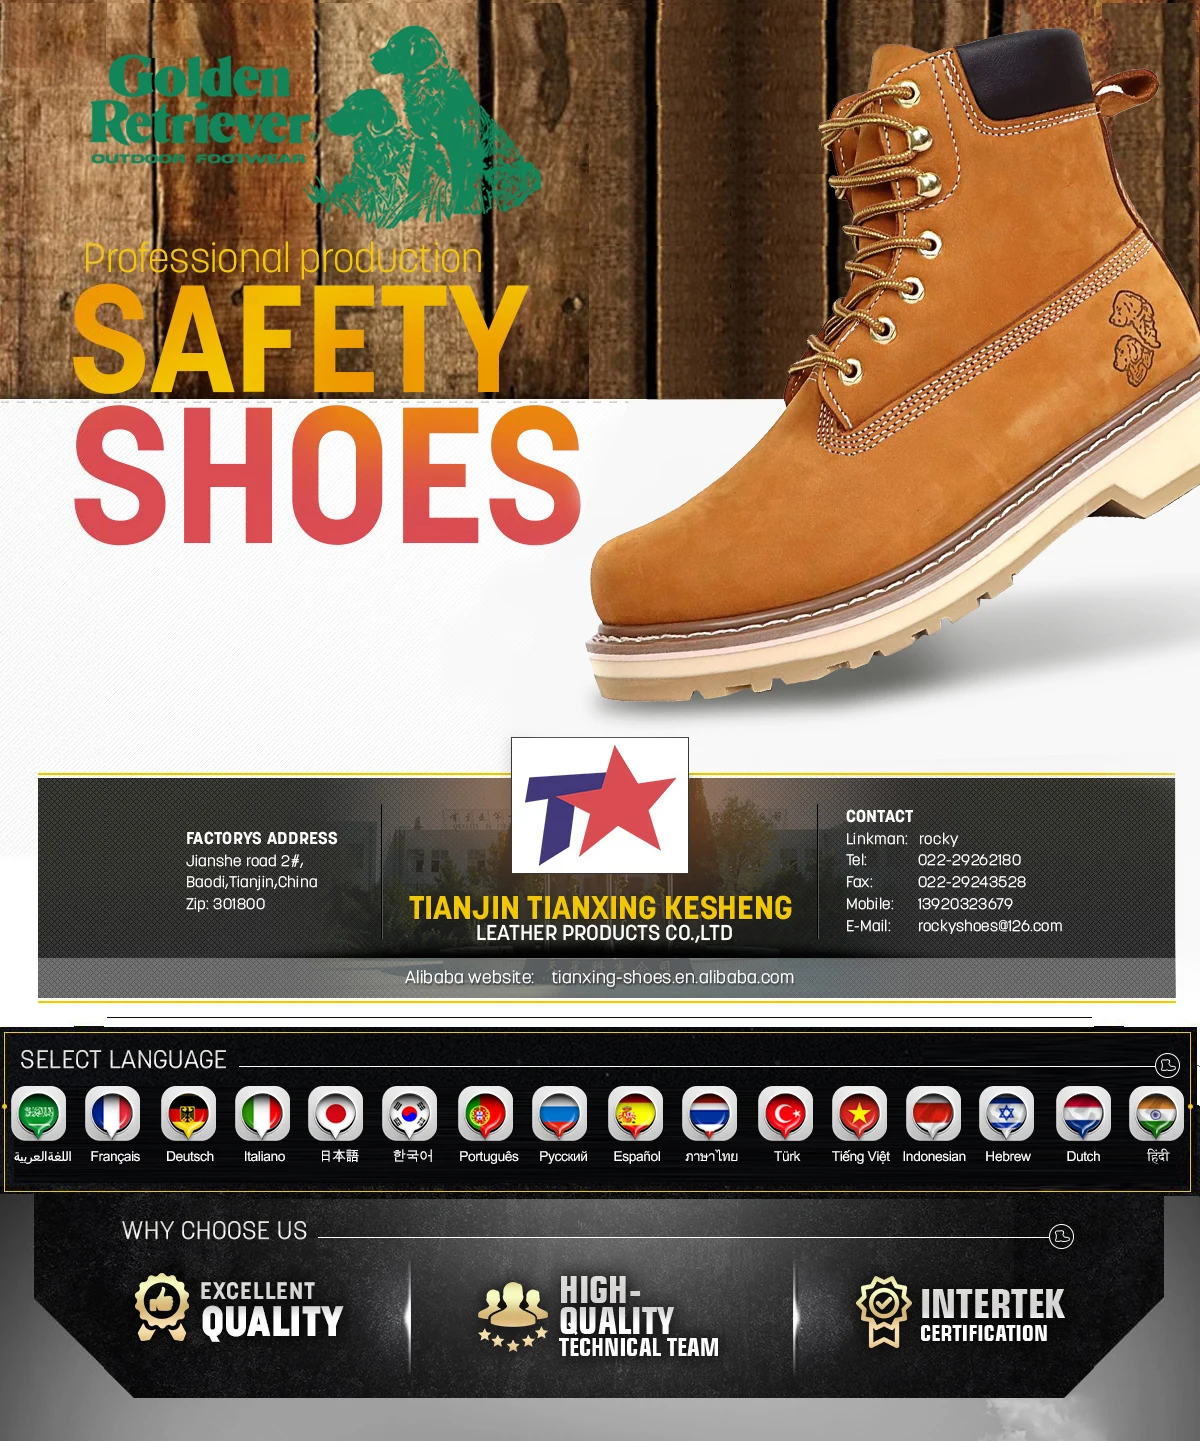 Tianjin Tianxing Kesheng Leather Products Co., Ltd. - Safety Shoes ...